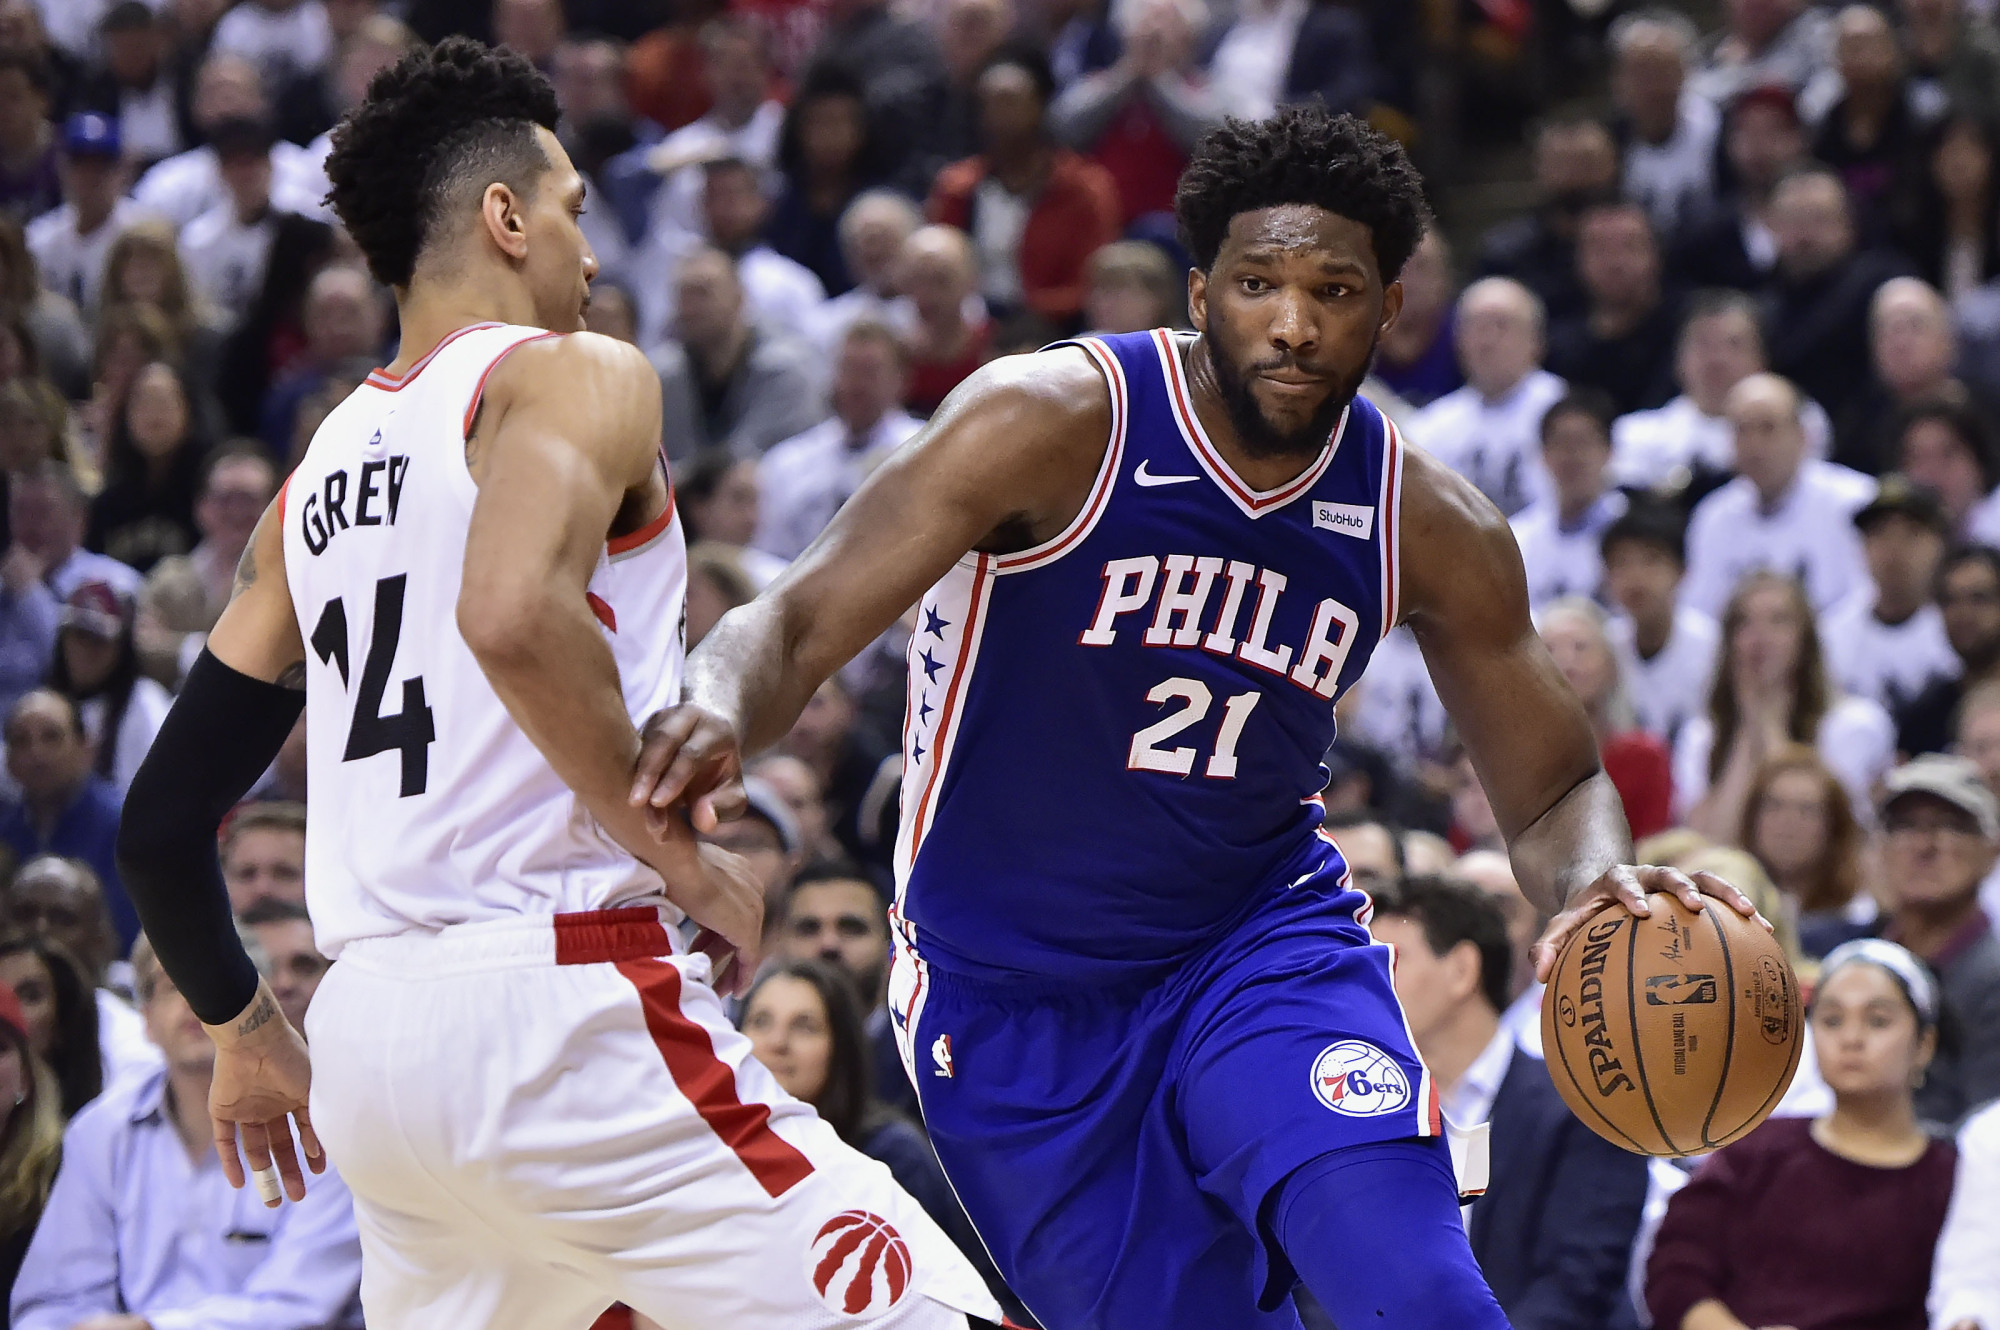 Philadelphia 76ers guard Ben Simmons (25) drives to the net around Toronto Raptors guard Danny Green (14) during first-half, second-round NBA basketball playoff action in Toronto, Monday, April 29, 2019. (Frank Gunn/The Canadian Press via AP)